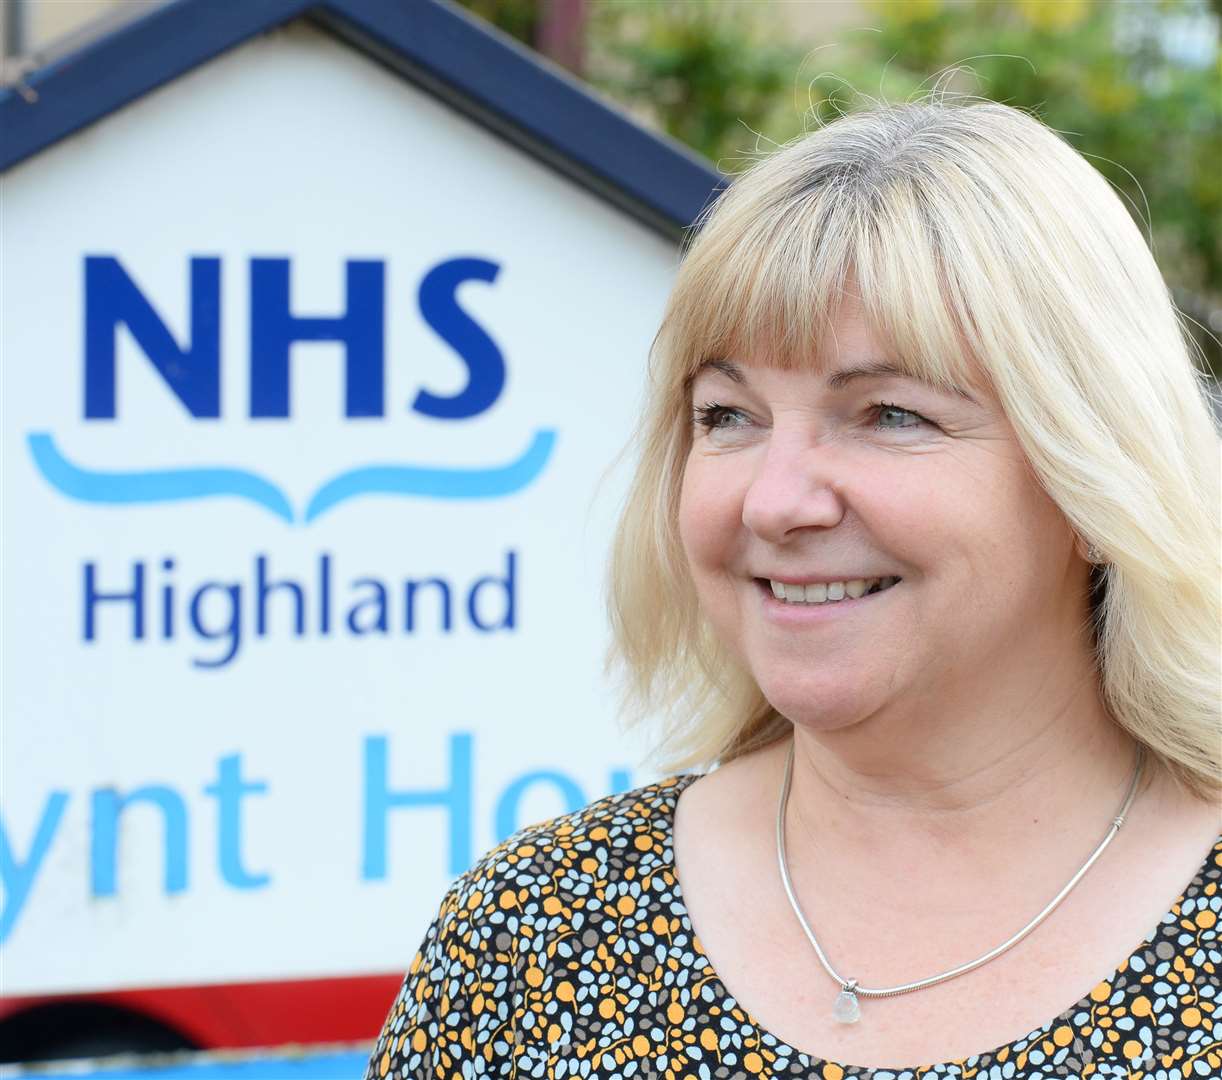 Chief executive Pam Dudek says NHS Highland has apologised unreservedly to patients for the data breach.